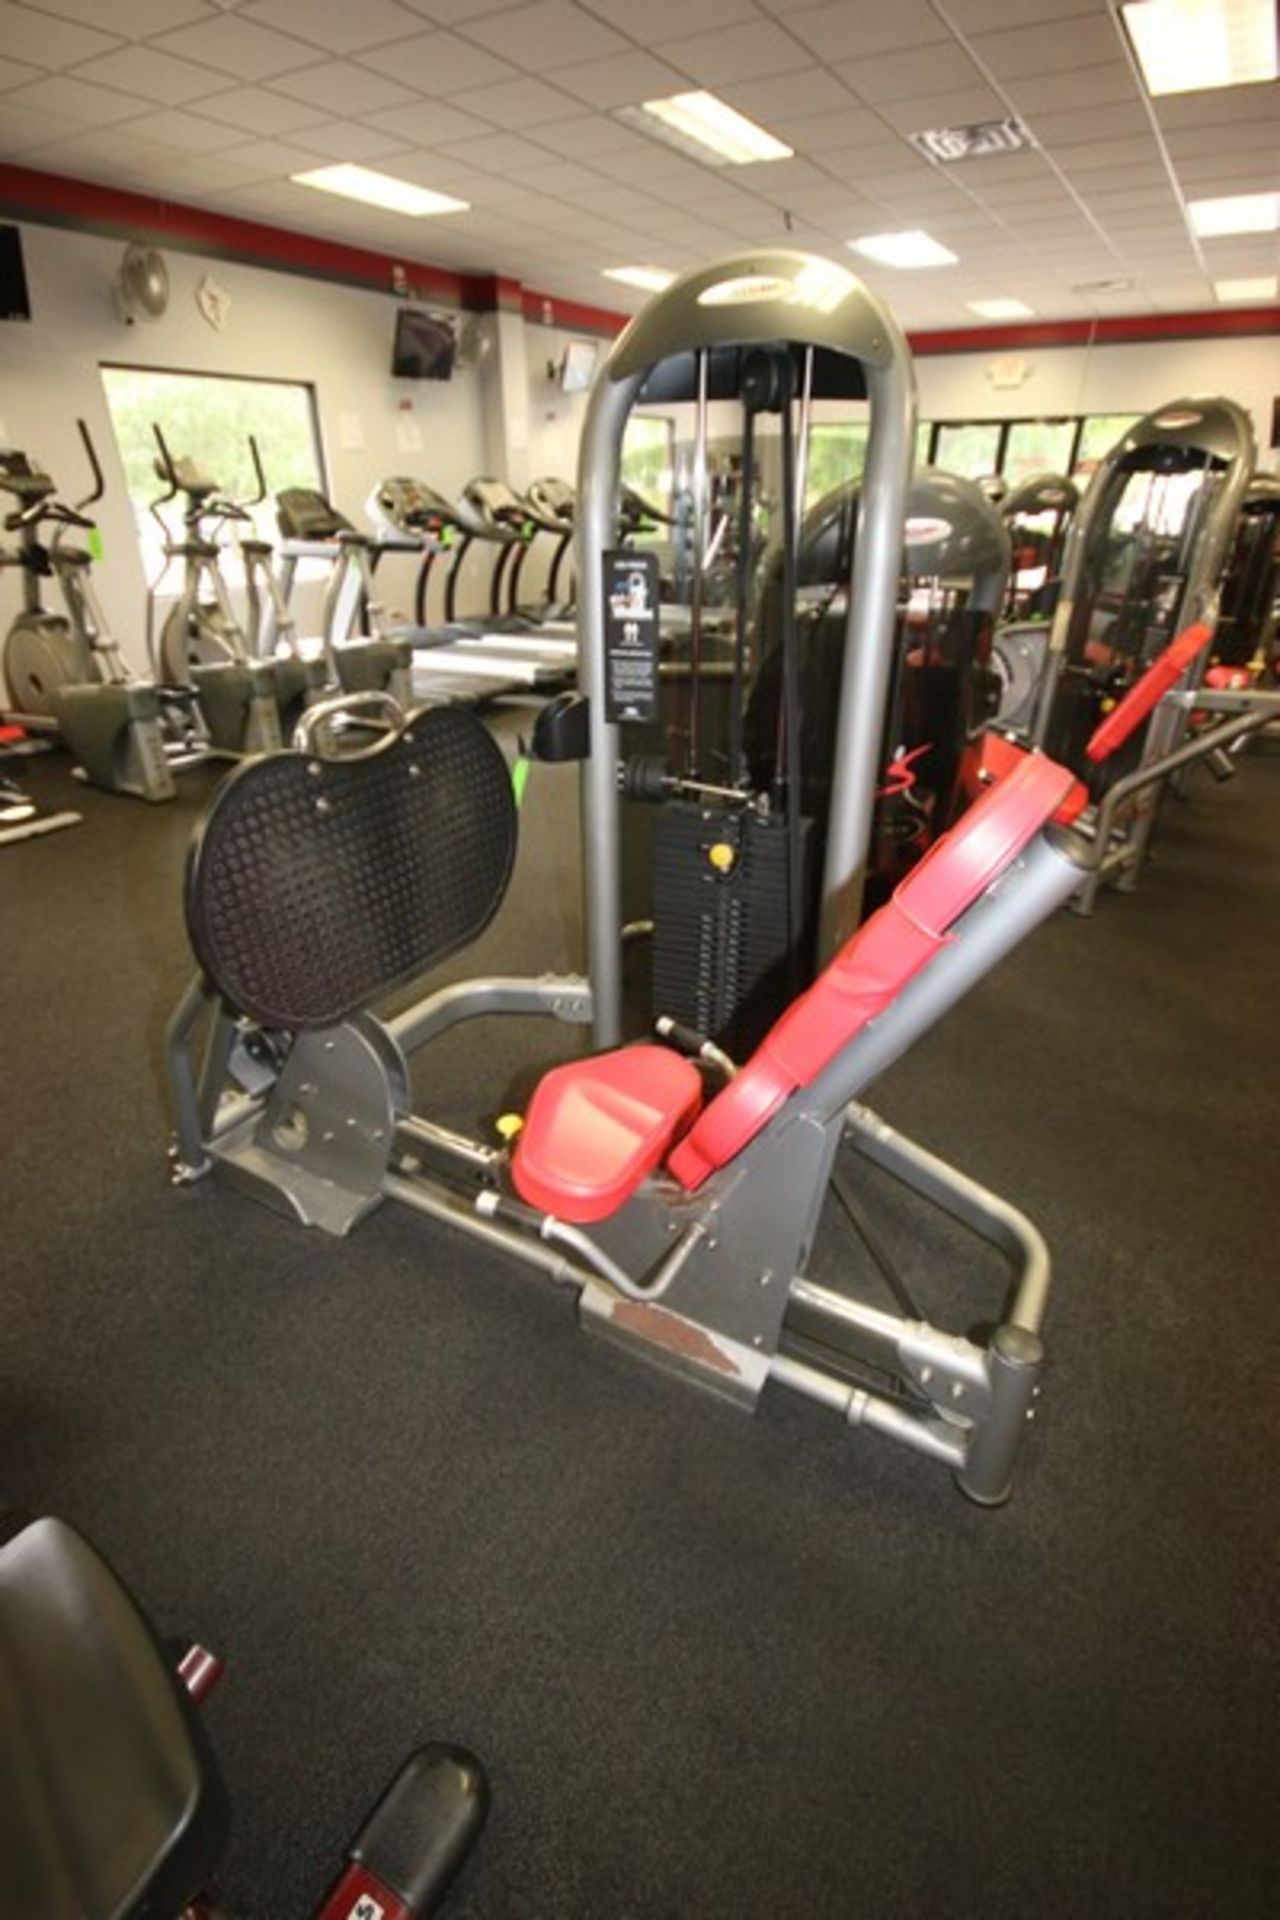 Matrix Leg Press Cable Machine, 10-385 lbs. Weight Range on Plates, Overall Dims.: Aprox. 5-1/2' L x - Image 2 of 3